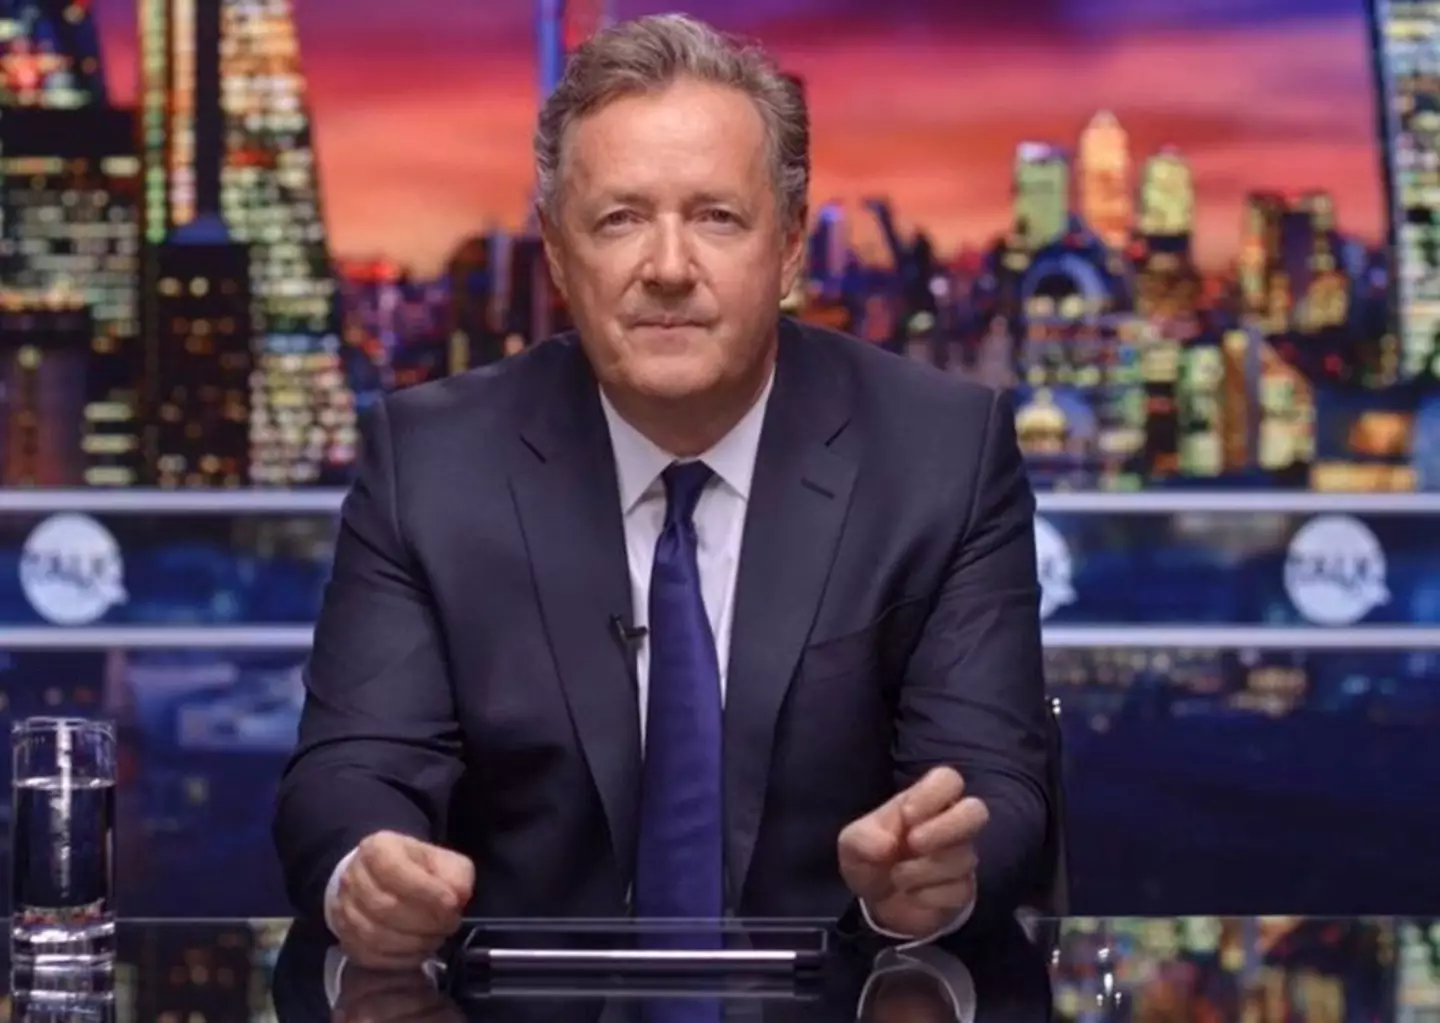 Piers Morgan returned with his new show this week.